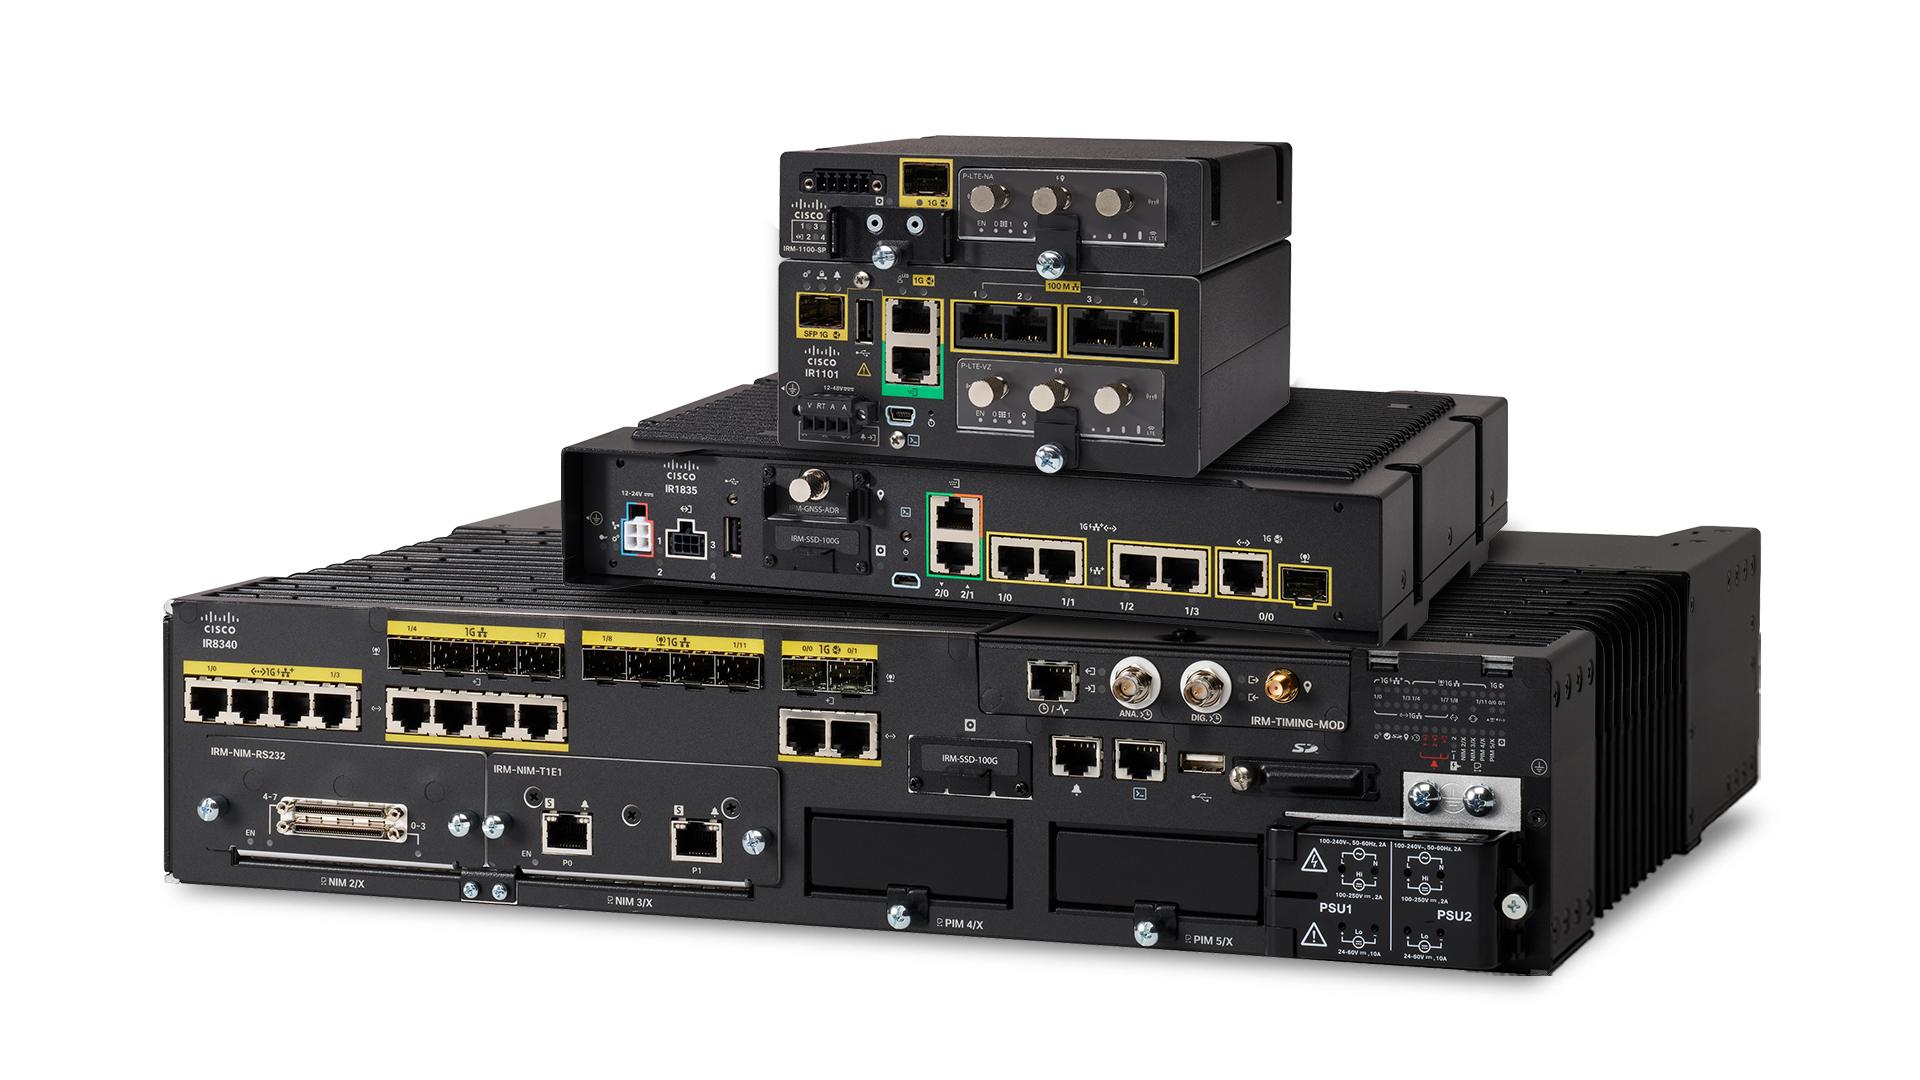 Cisco Catalyst IR1100, Catalyst IR1800, and Catalyst IR8300 Rugged Series Routers